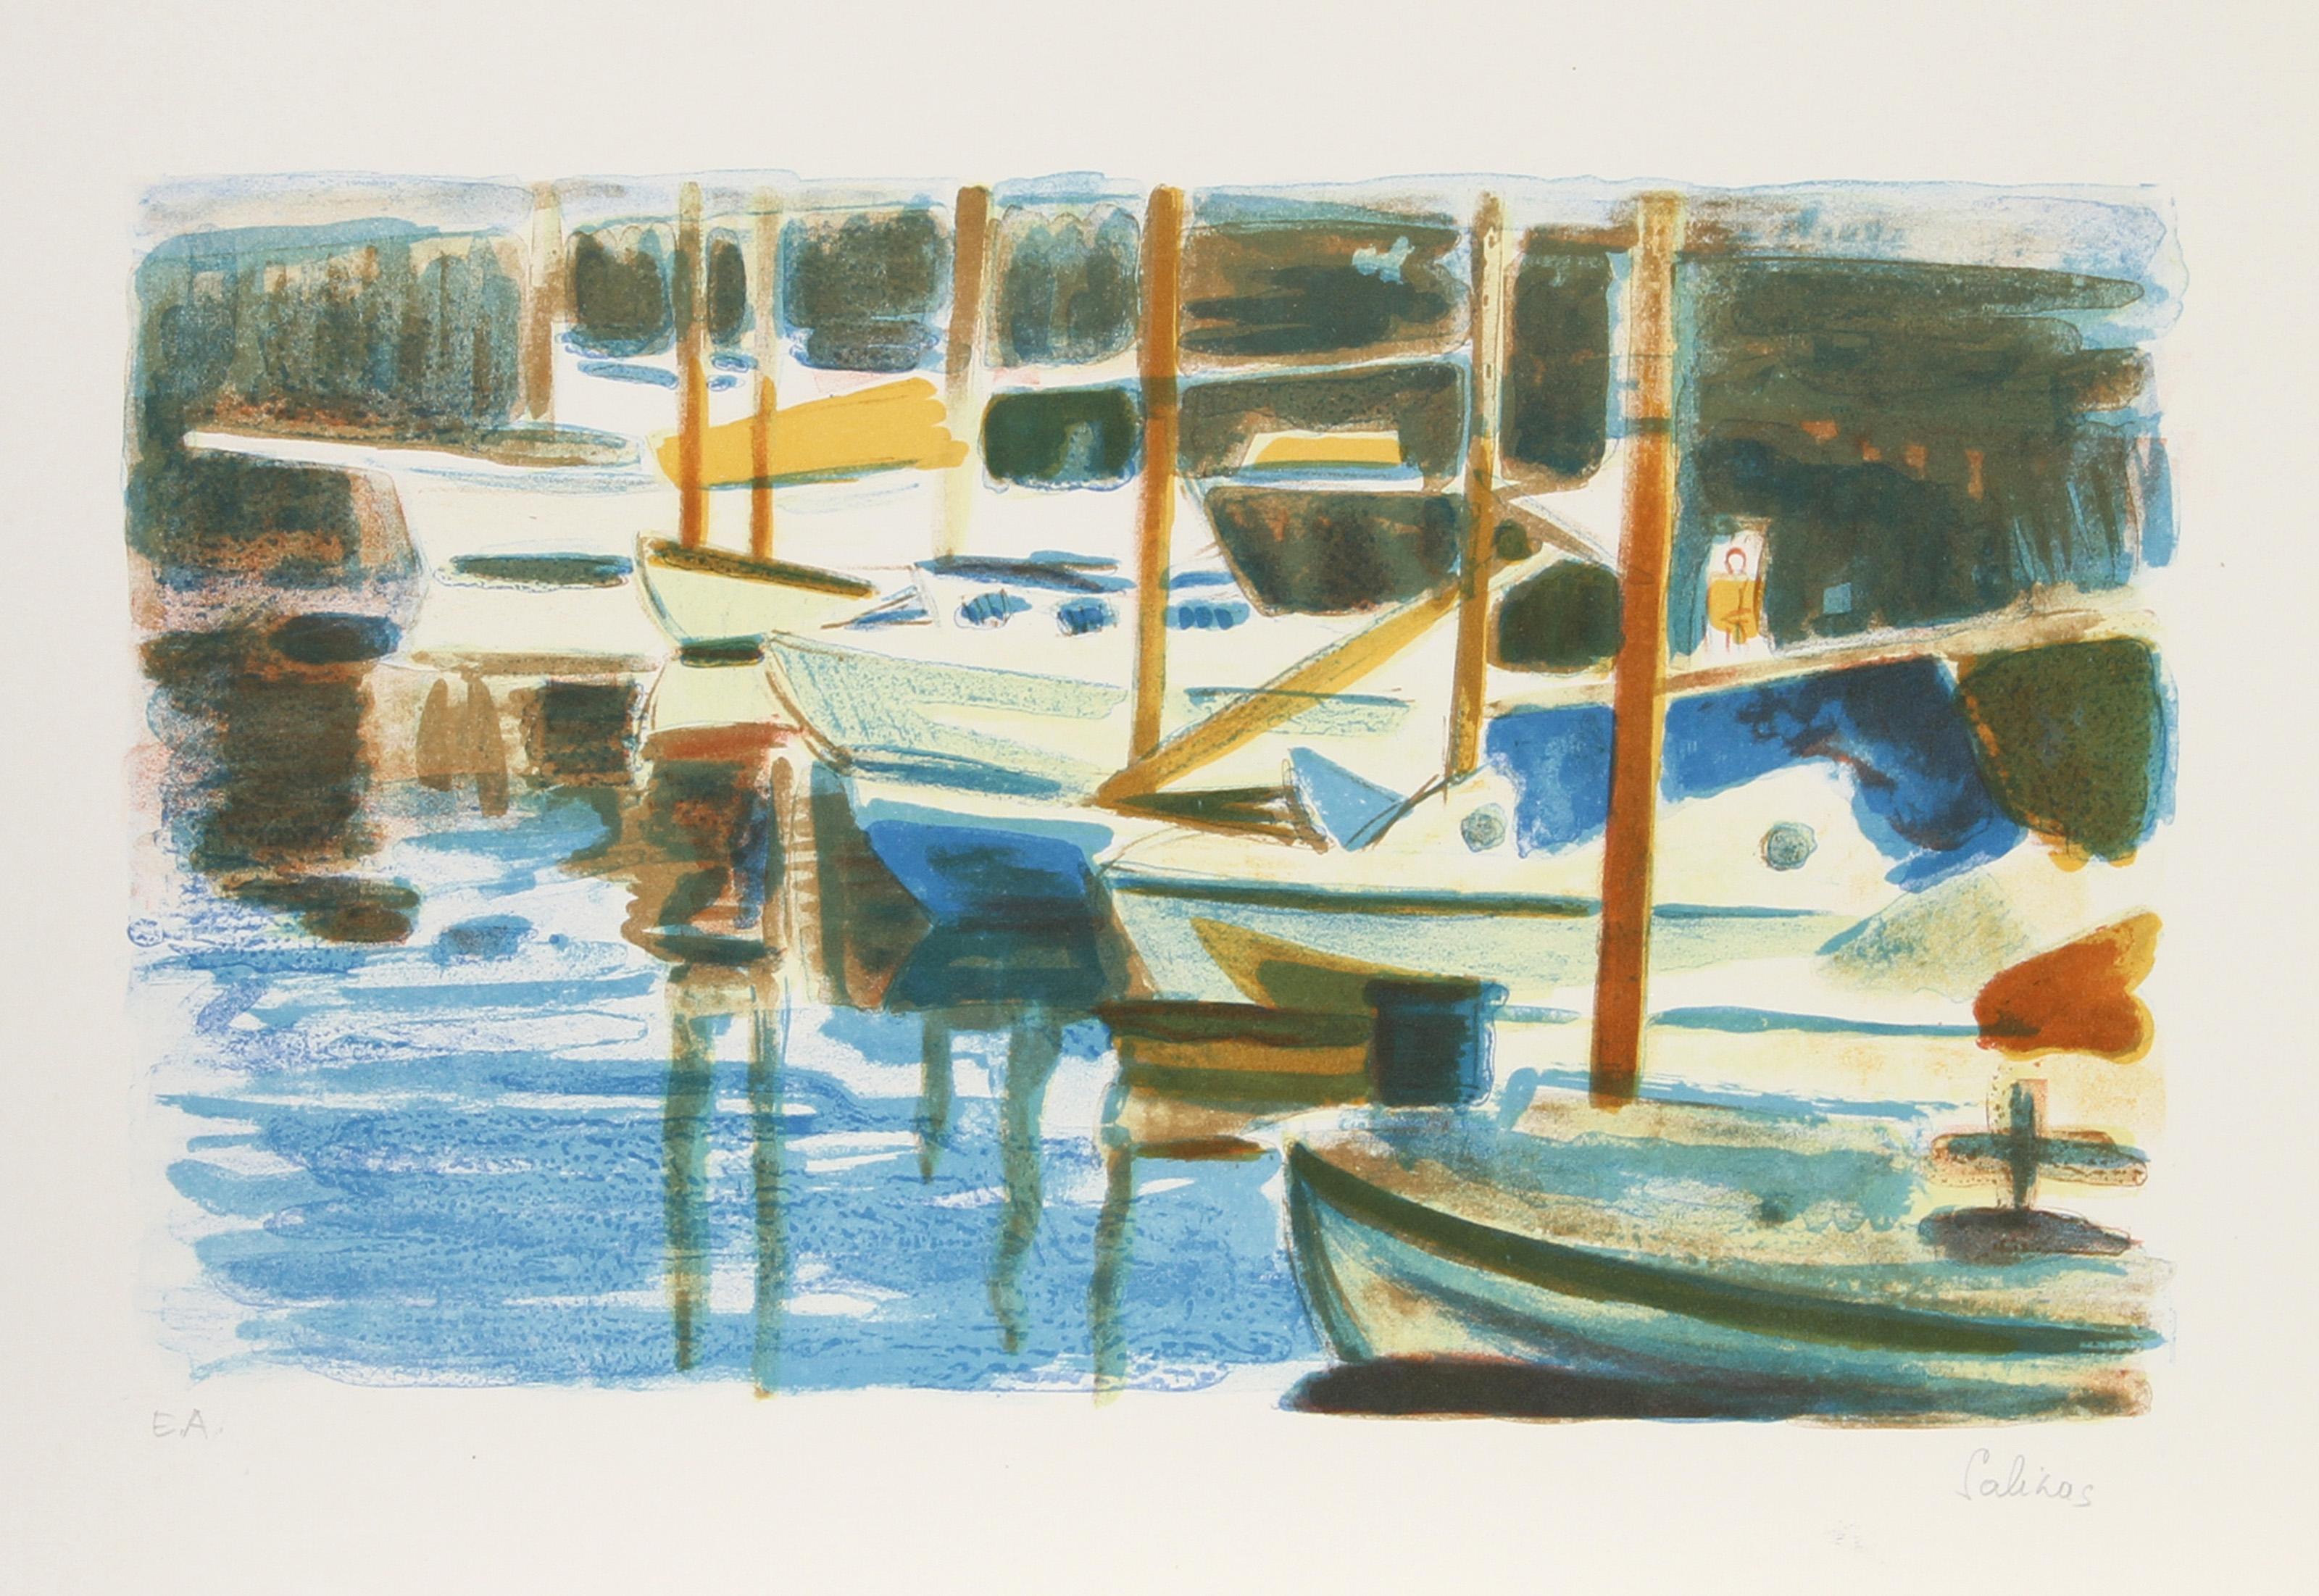 Laurent Marcel Salinas, Egyptian/French (1913 - 2010) -  Honfleur II. Year: circa 1970, Medium: Lithograph, signed in pencil, Edition: EA, Image Size: 13.5 x 20 inches, Size: 19 x 25 in. (48.26 x 63.5 cm) 